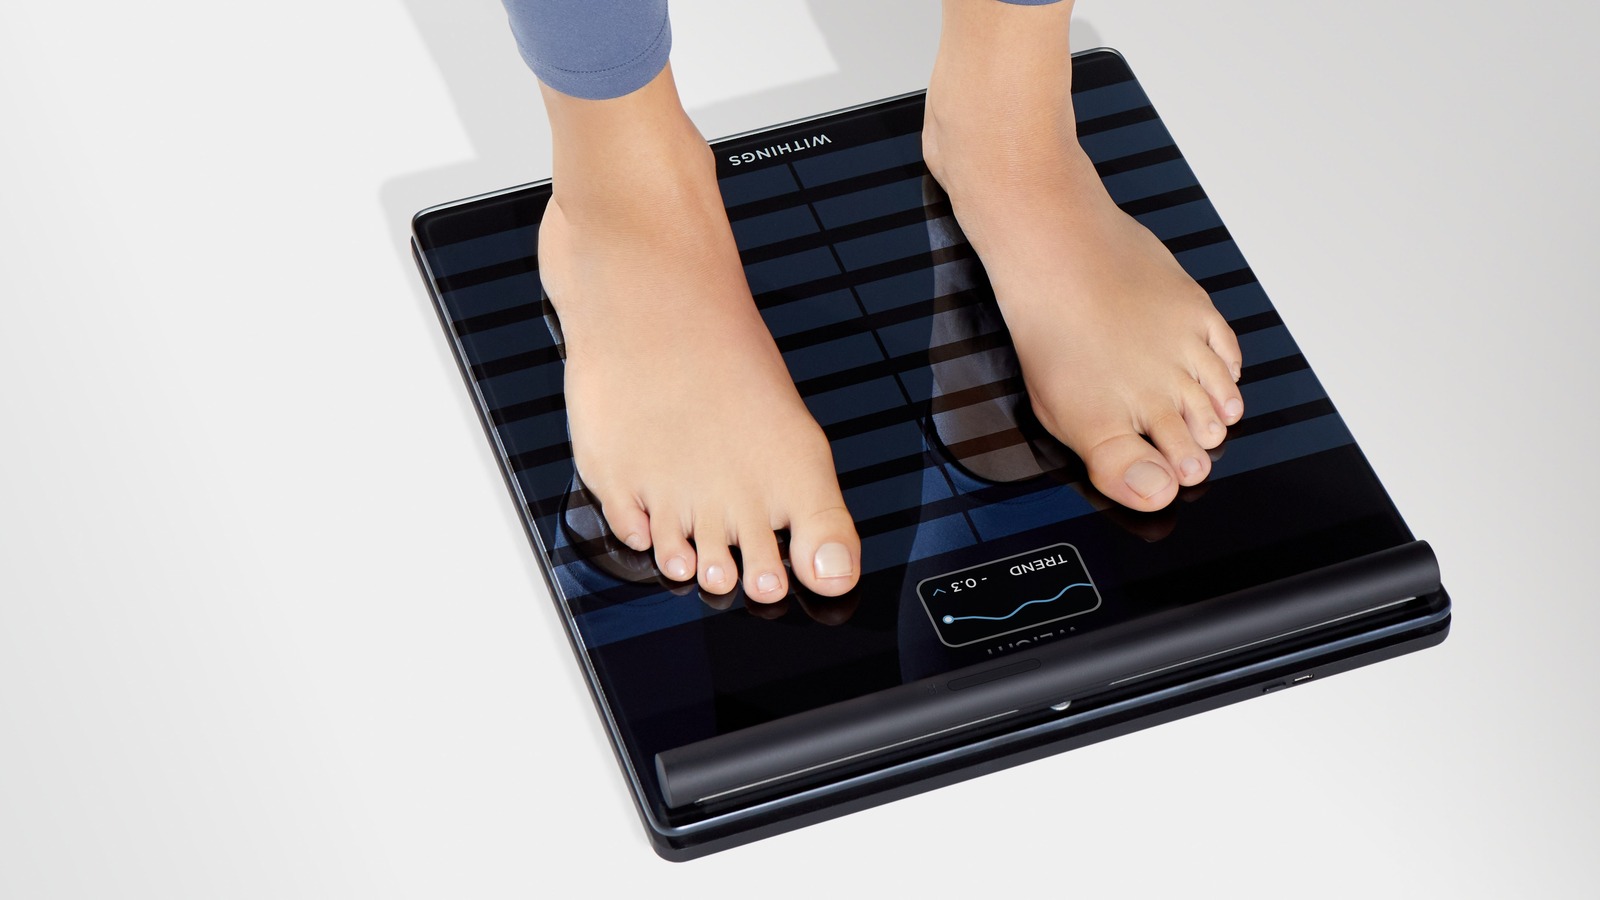 New FDA-Approved Body Scan Scores as High-End Smart Scale